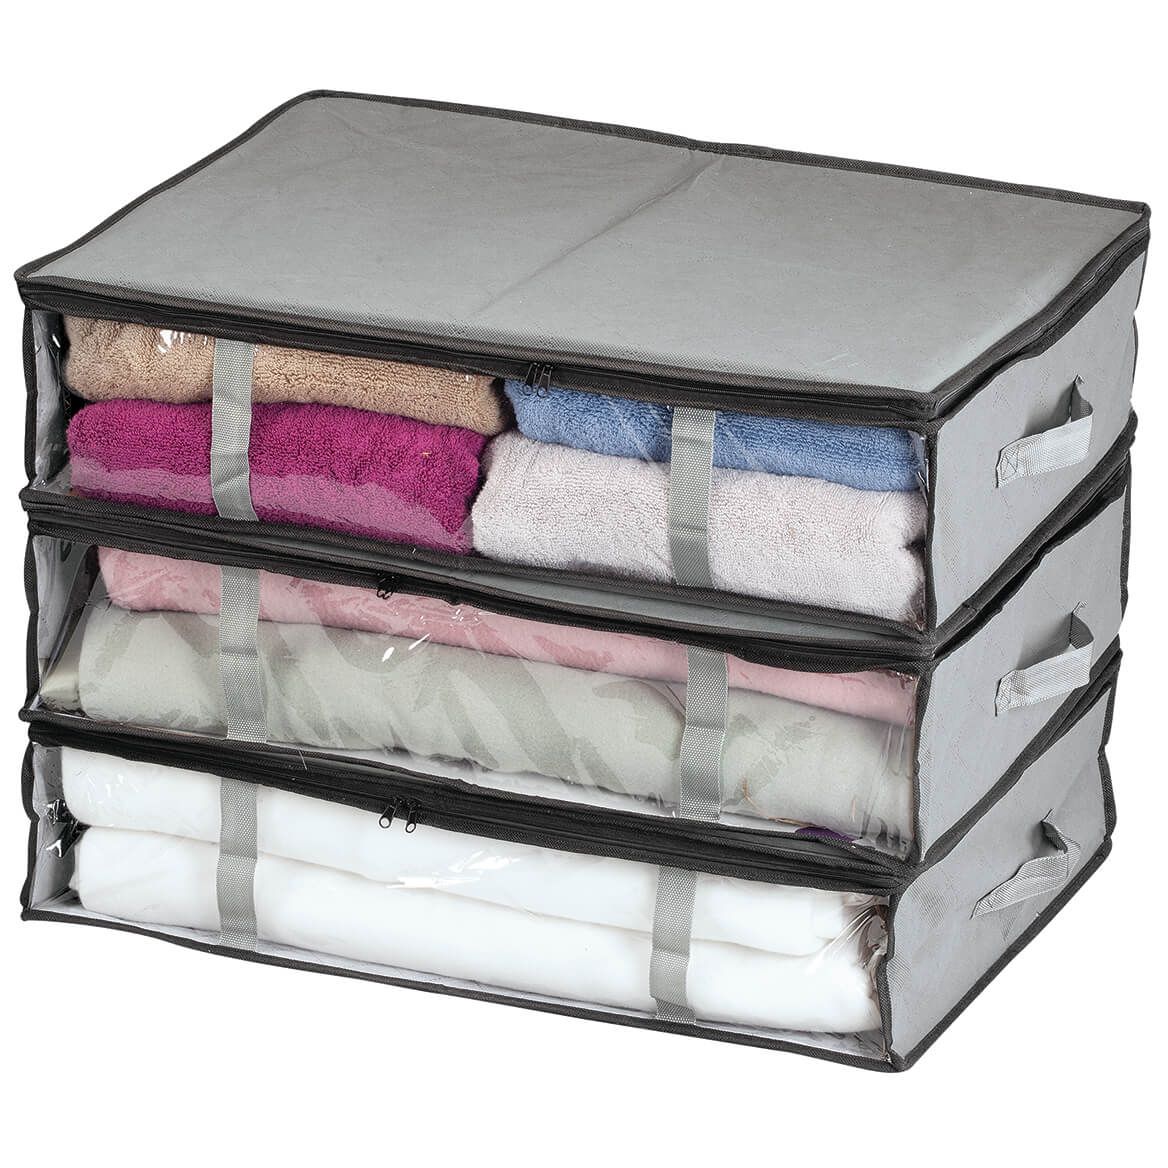 Quilted Underbed Storage Organizers - Miles Kimball